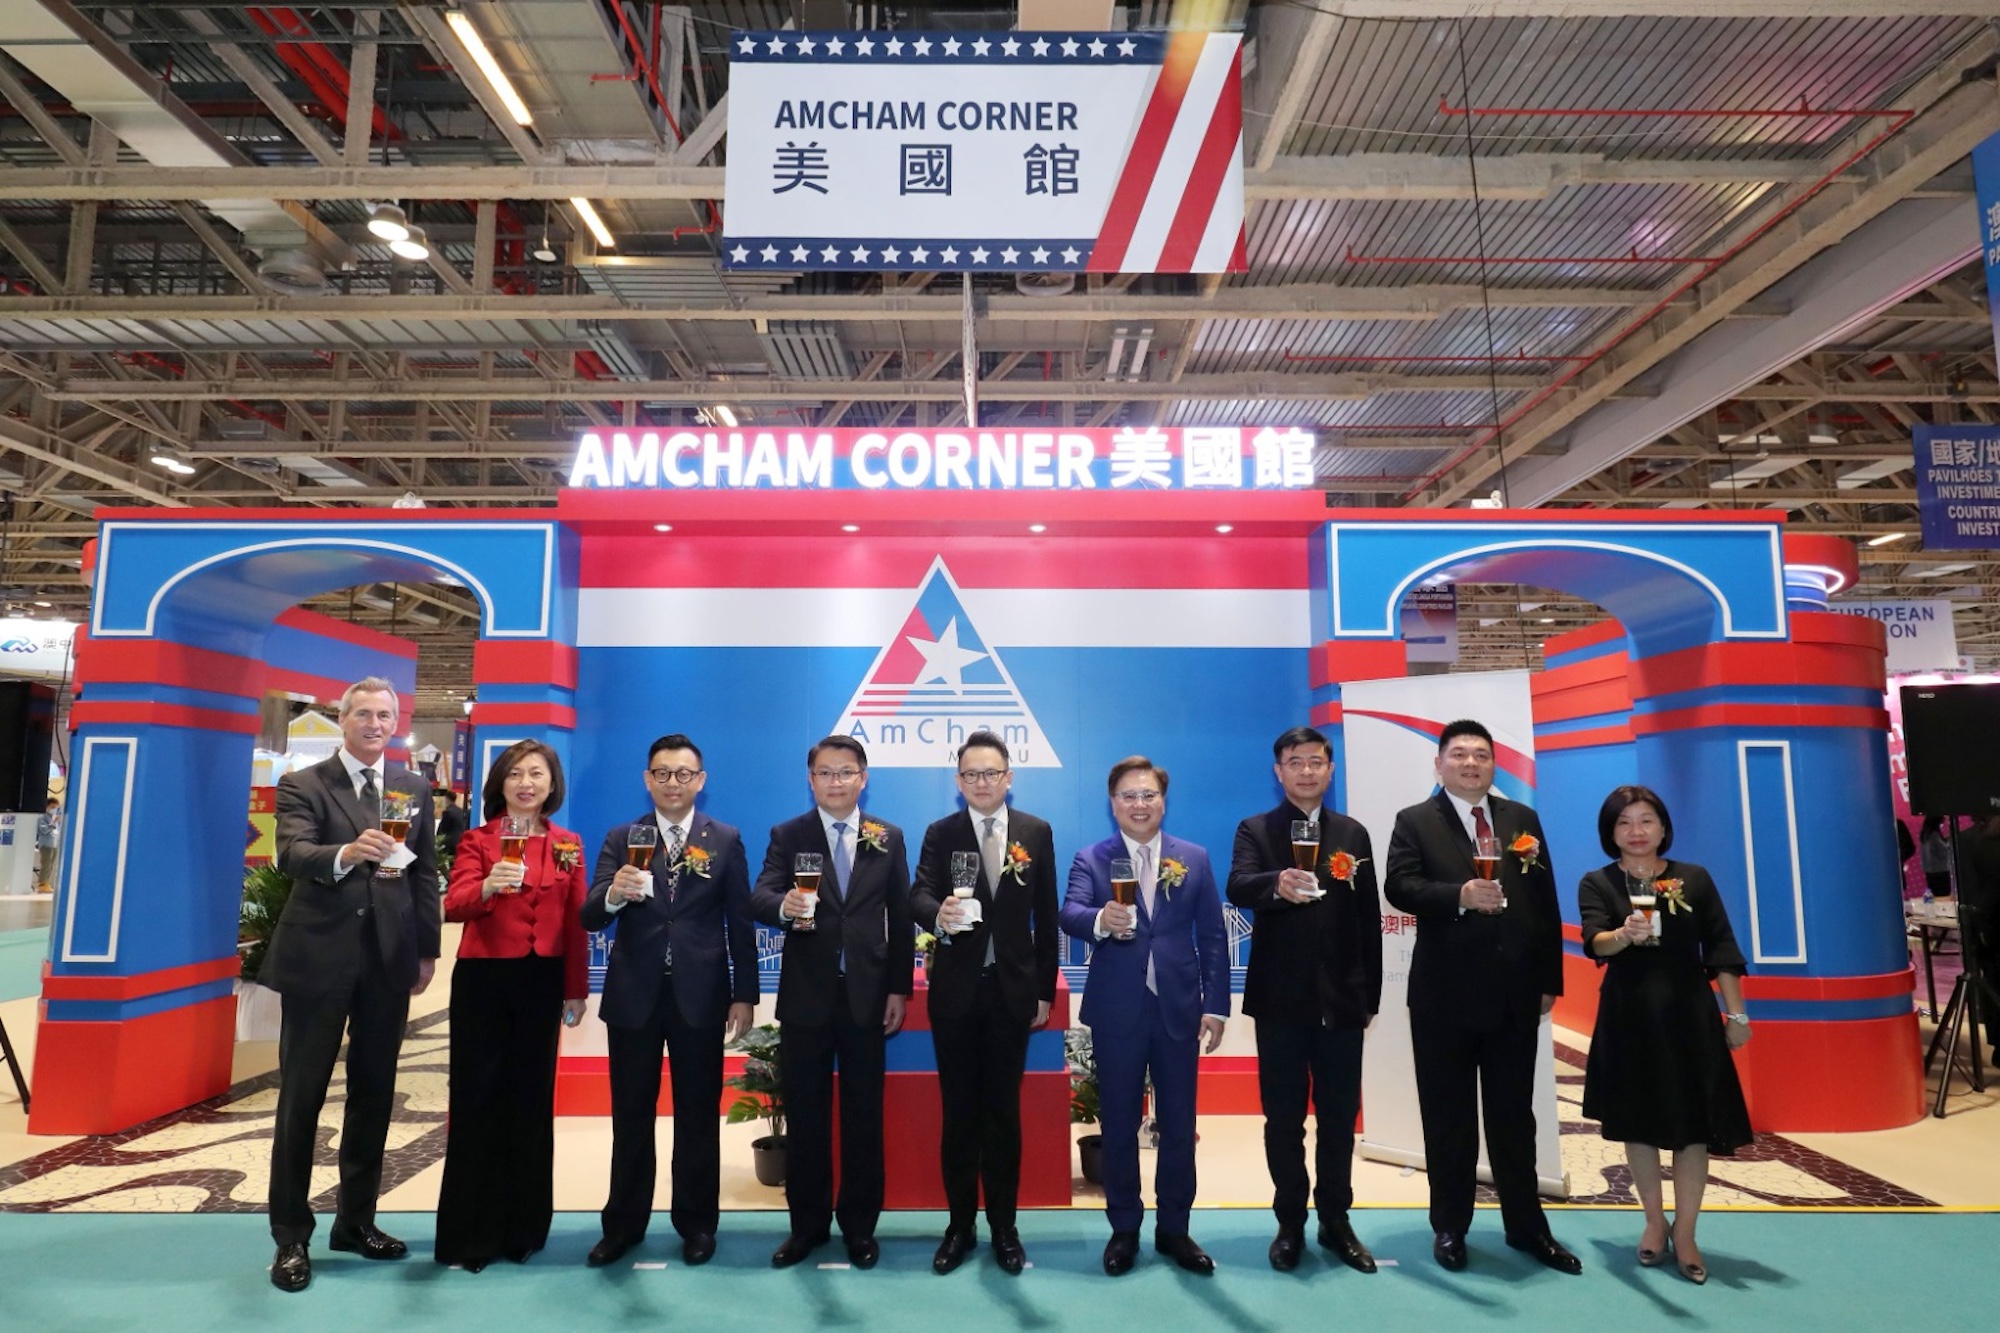 For the 26th MIF, the AmCham Corner featured members' development plan in Hengqin and the wider GBA